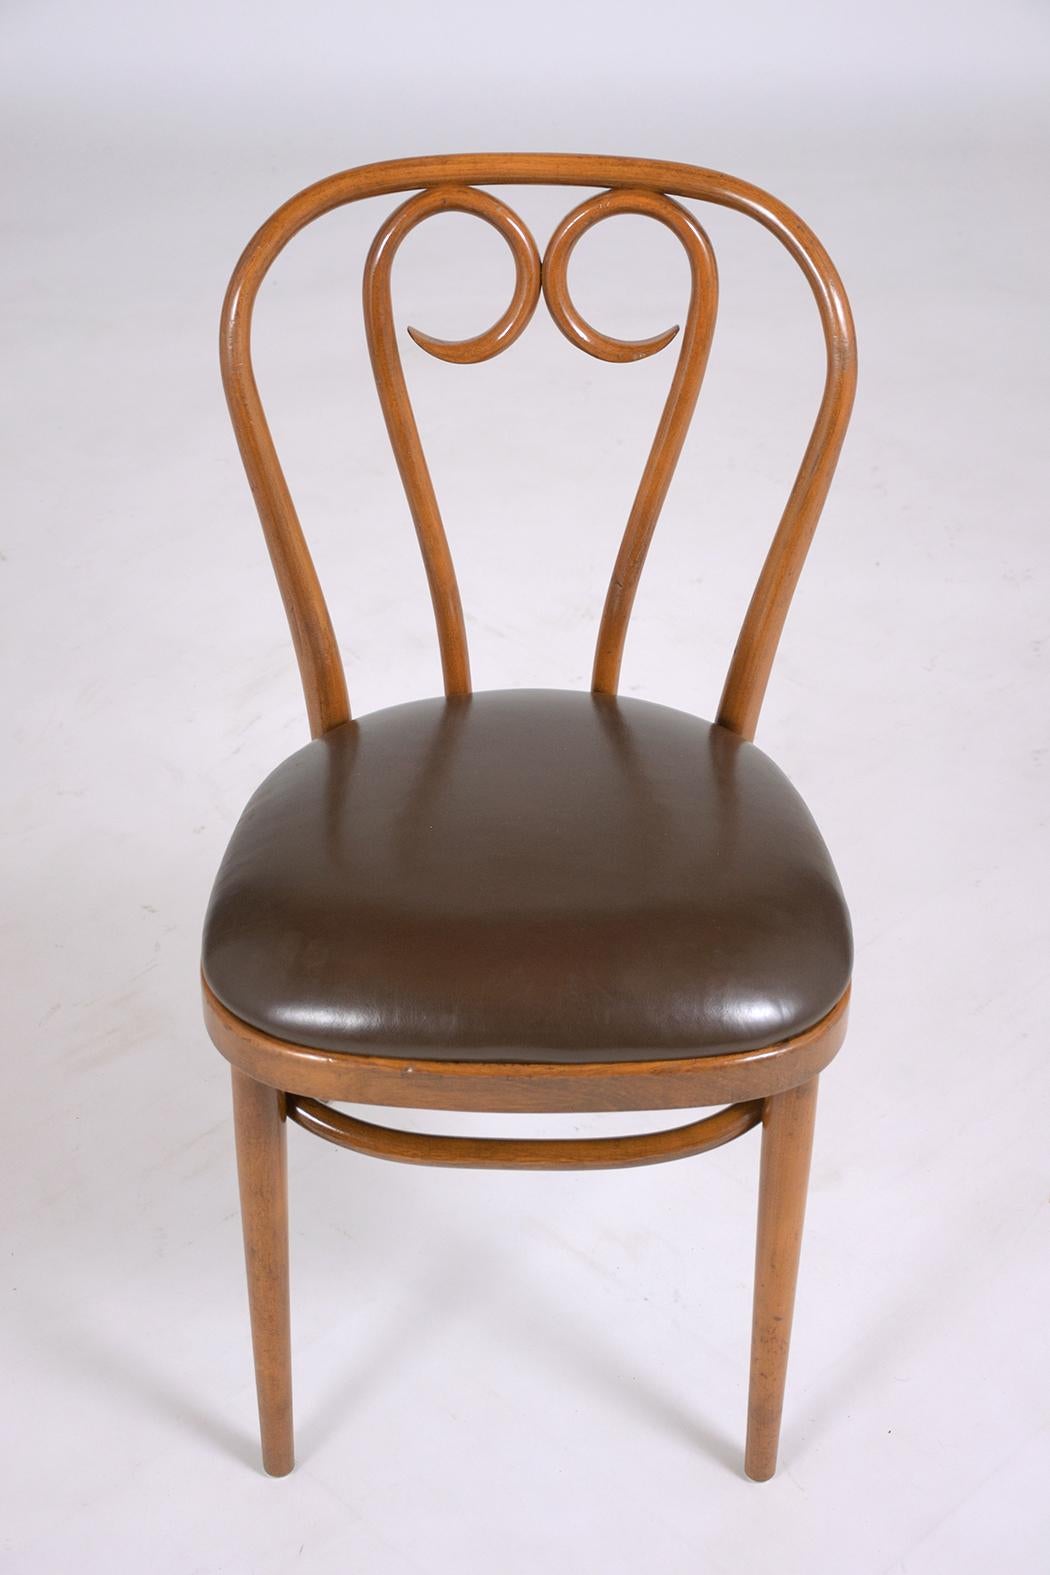 Art-Deco Thonet Bentwood Leather Dining Chairs with Walnut Finish - Set of Six For Sale 2